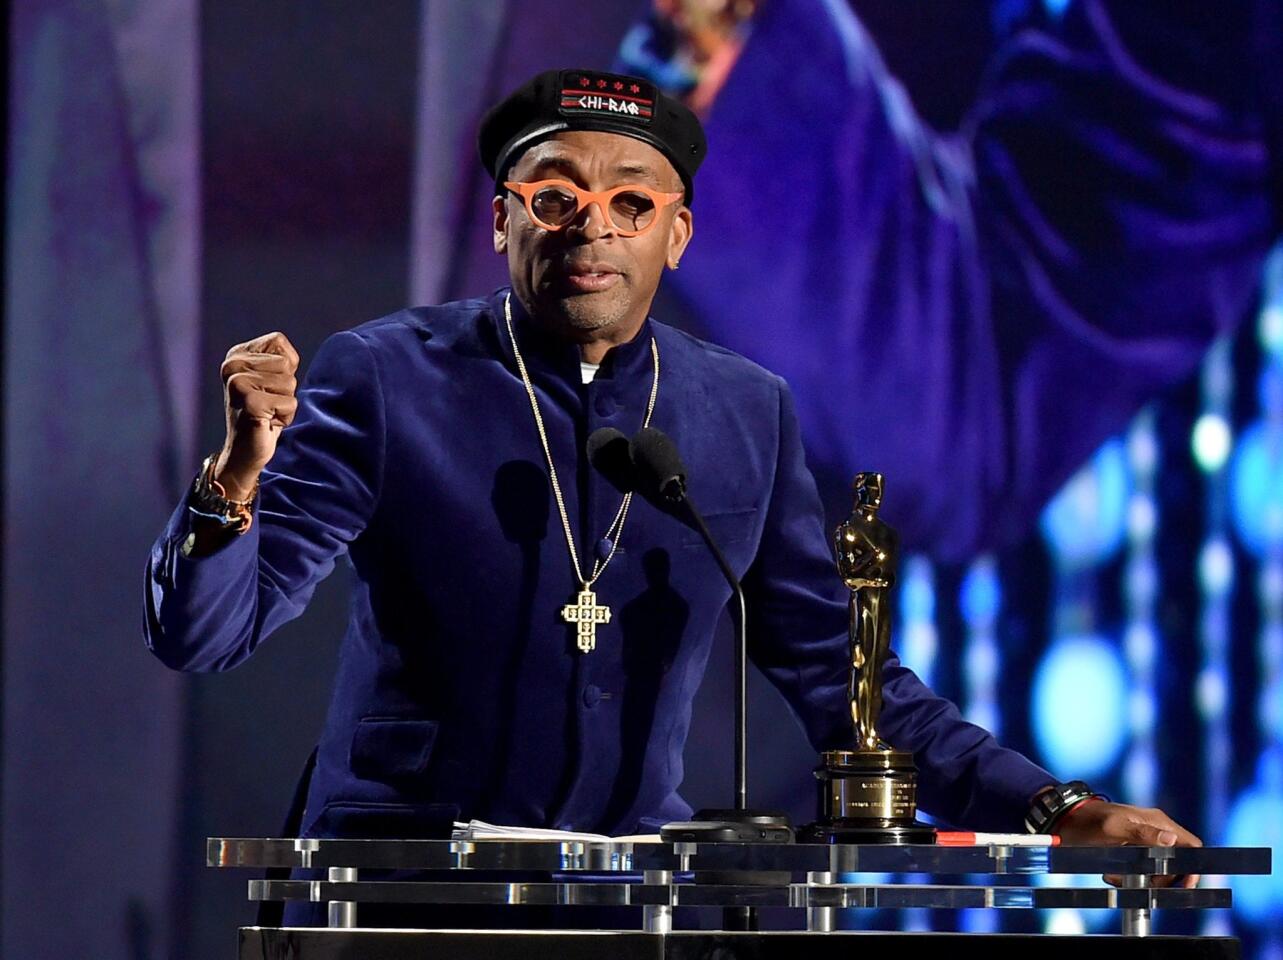 Filmmaker Spike Lee accepts an award onstage during the Academy of Motion Picture Arts and Sciences' 7th annual Governors Awards at the Ray Dolby Ballroom at Hollywood & Highland Center on Nov. 14, 2015 in Hollywood.